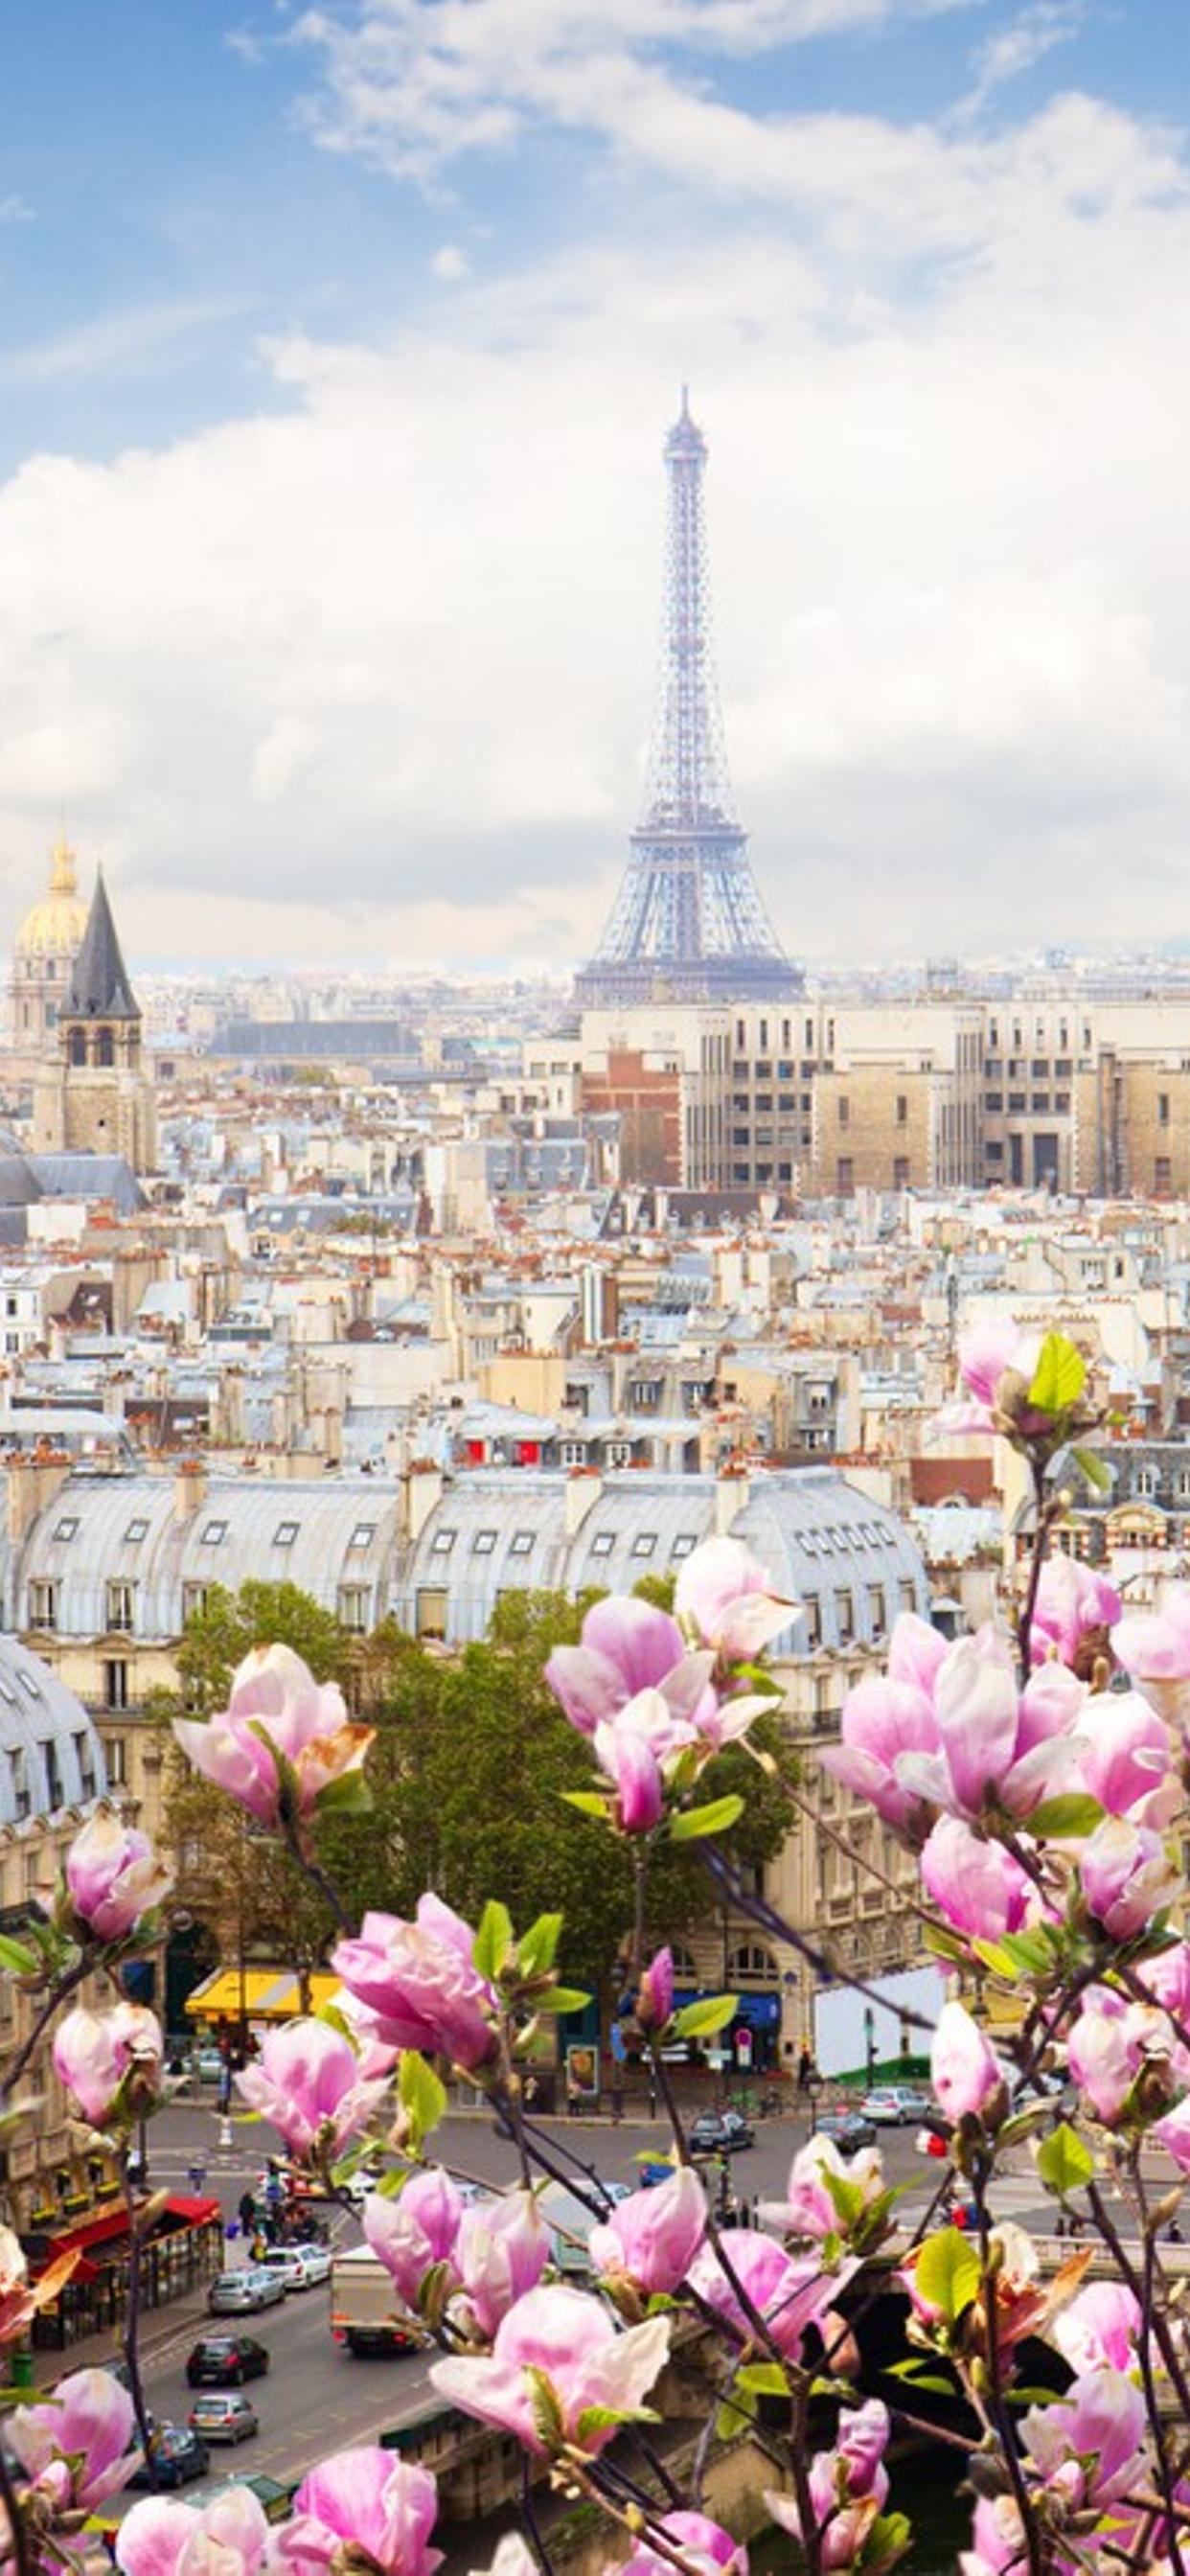 Paris cityscape with the Eiffel Tower and blooming flowers - Paris